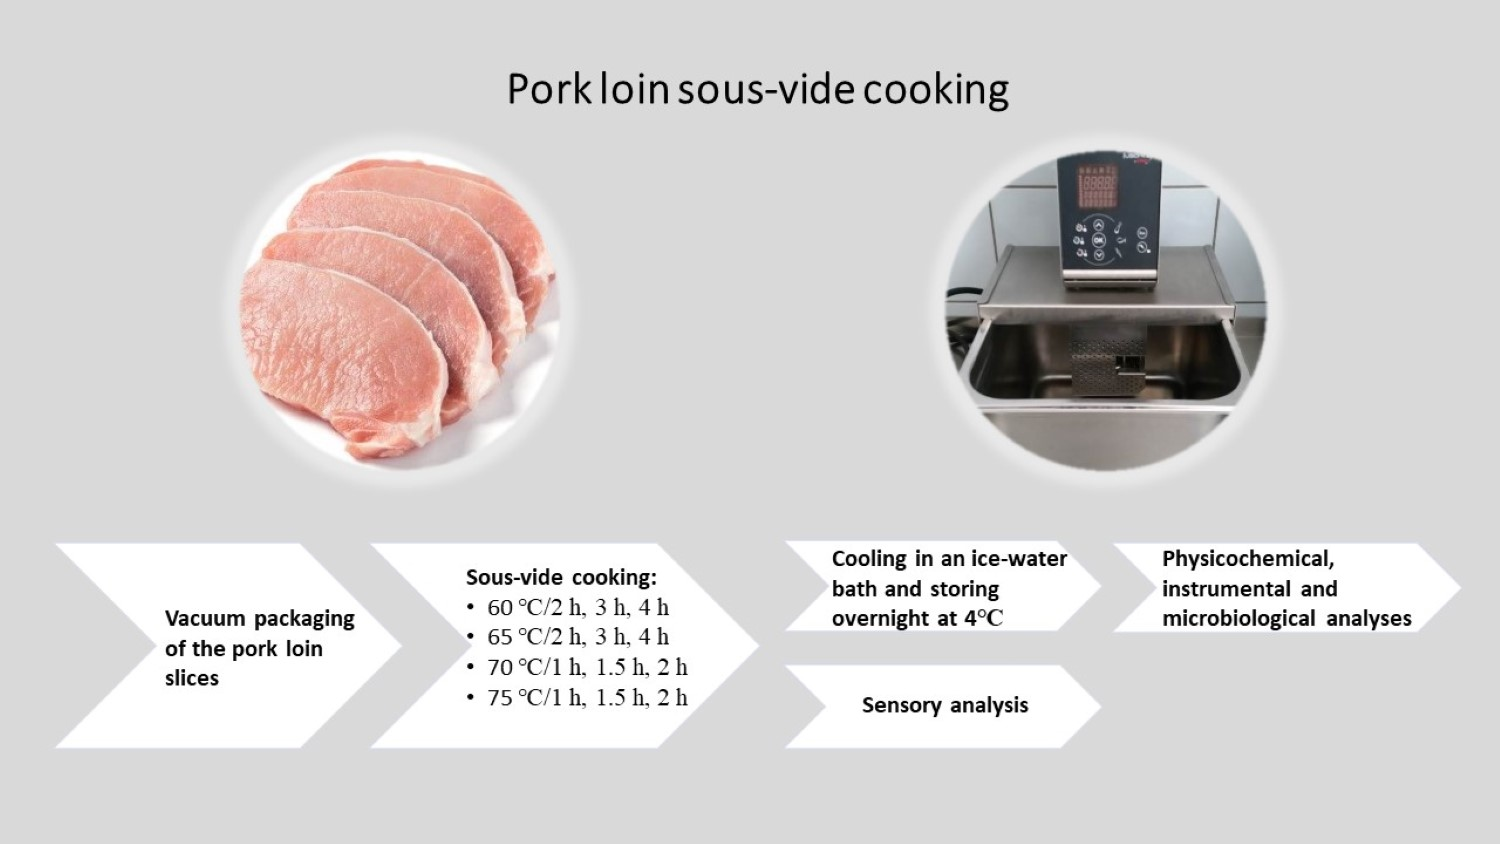 Applied Sciences | Full-Text | Sous Vide Cooking Effects on Physicochemical, Microbiological and Sensory Characteristics of Pork Loin